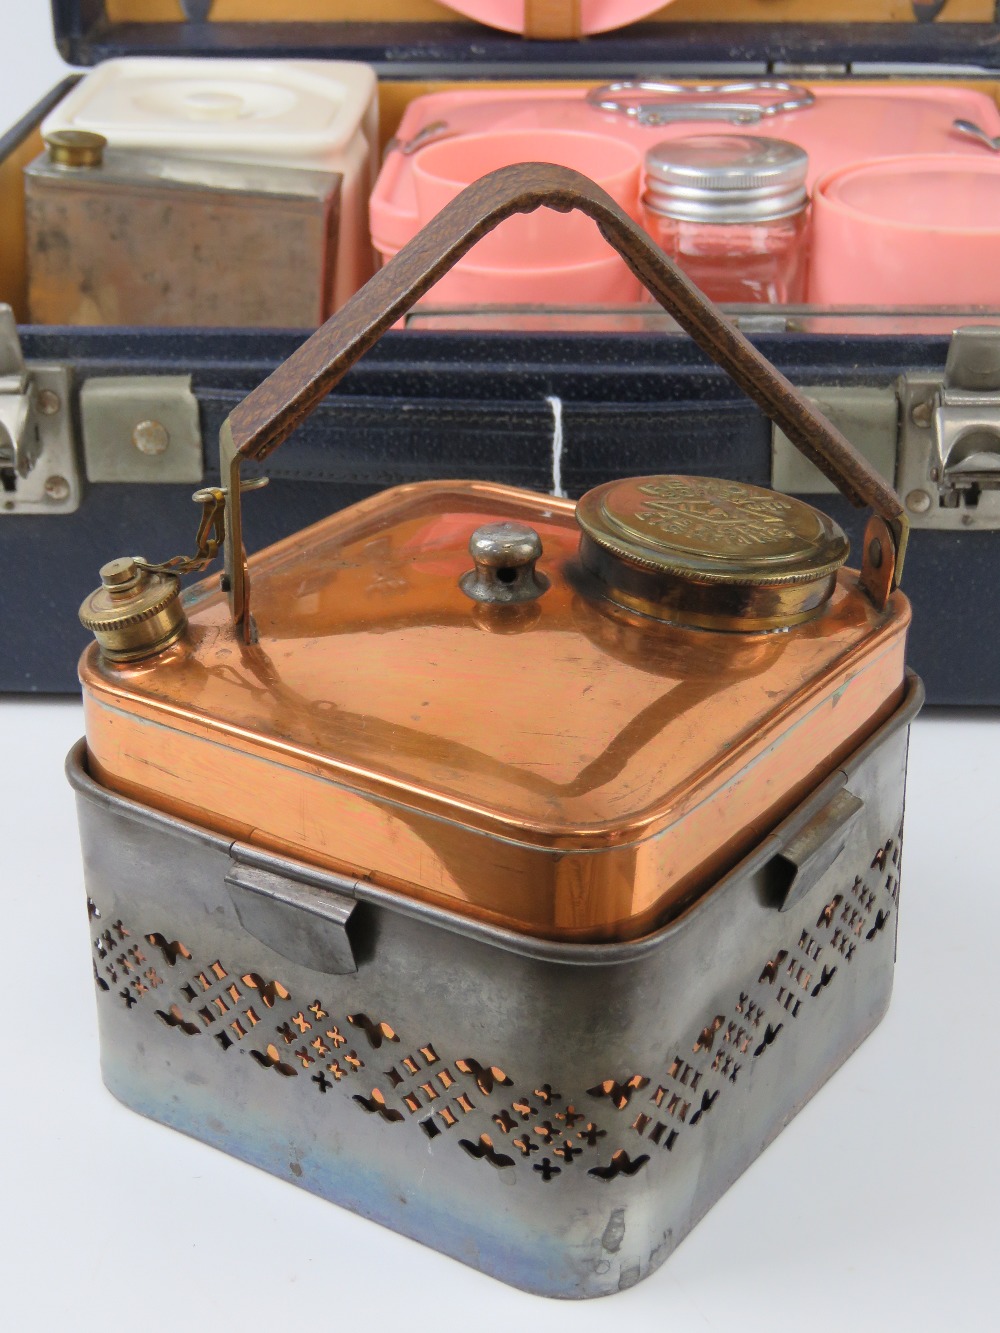 A vintage picnic case by Ilat with contents including beakers, teacups, storage boxes, plates, - Image 5 of 7